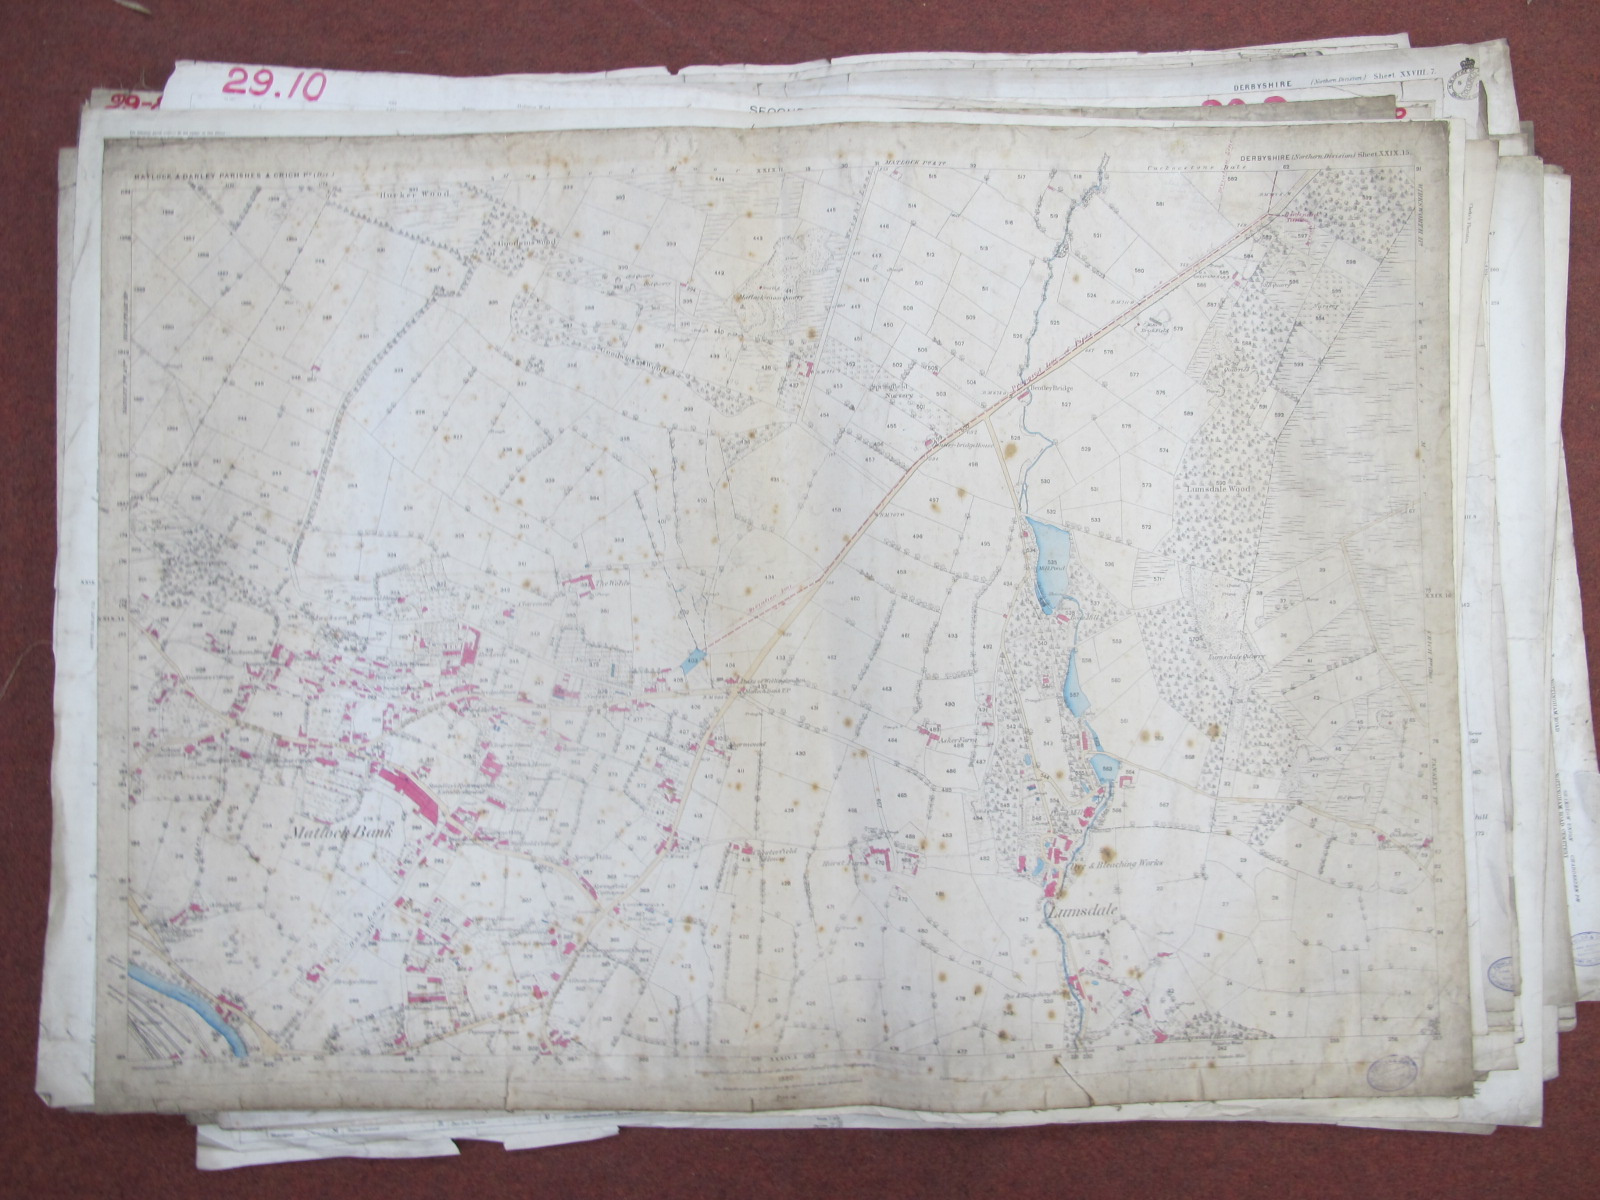 Derbyshire Maps, to include, Matlock Bath, Scarsdale, Cuckoostone Dale, Darley Dale, Youlgreave, - Image 3 of 10